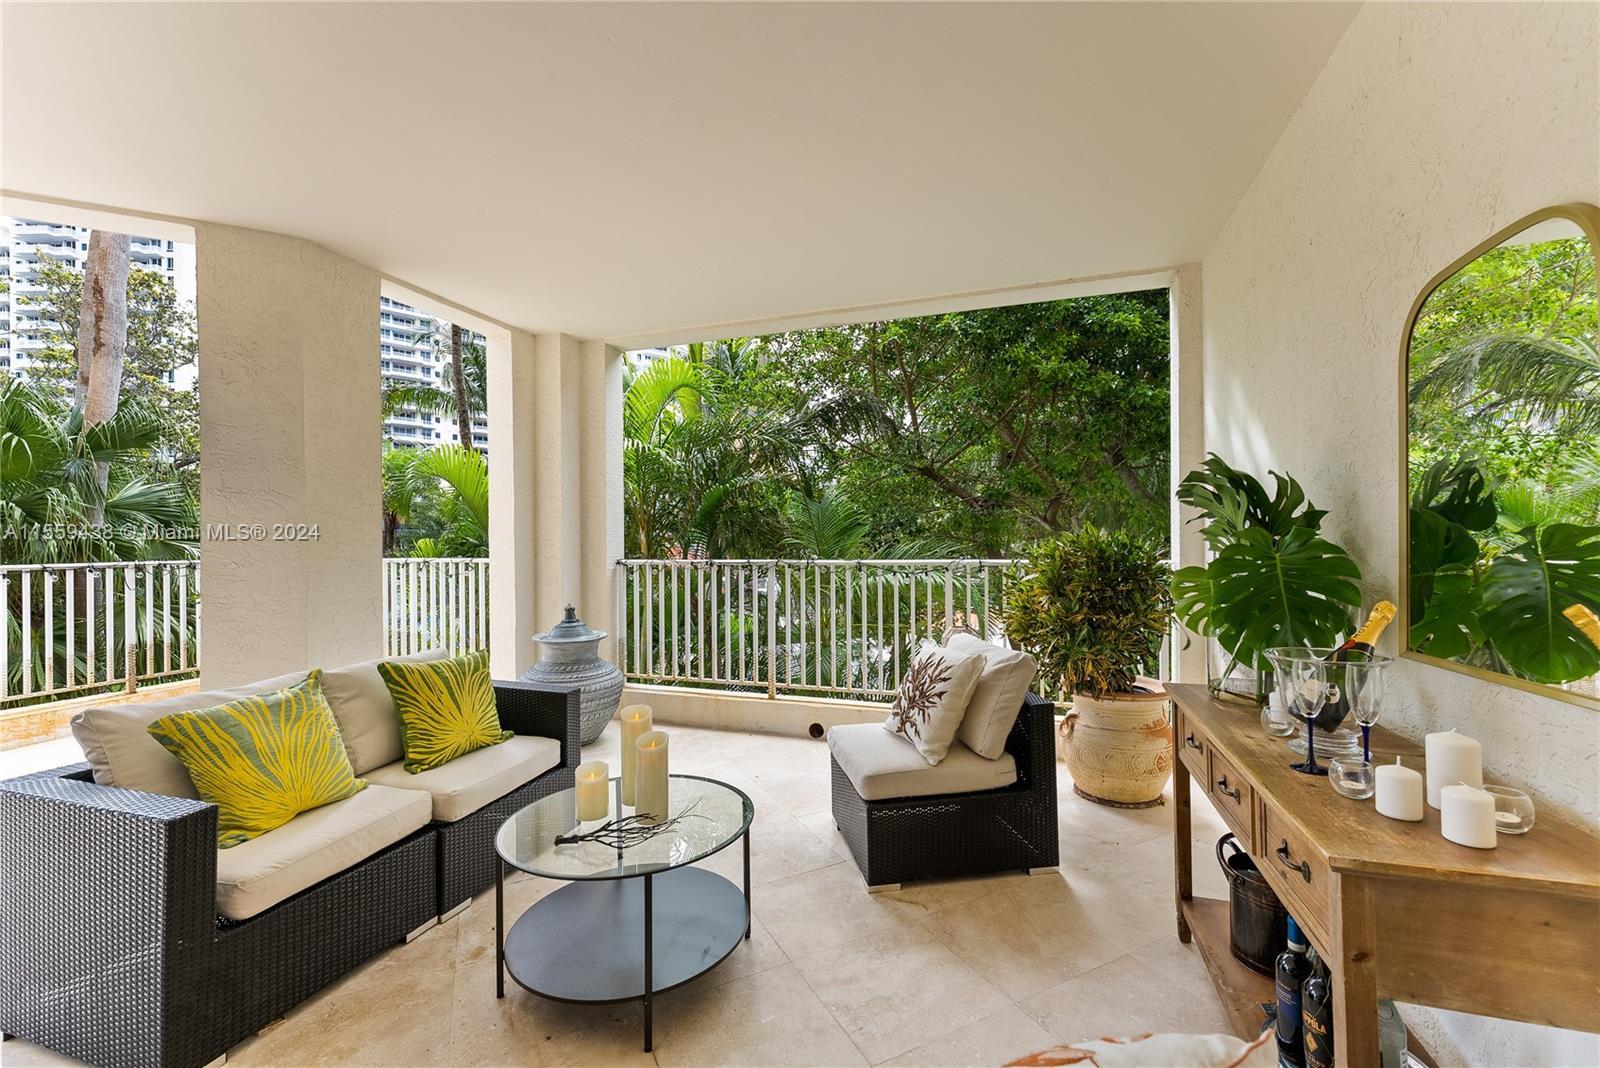 2 Bedroom 2 Bath meticulously renovated apartment at The Ocean Club in Key Biscayne. 
Sophisticated